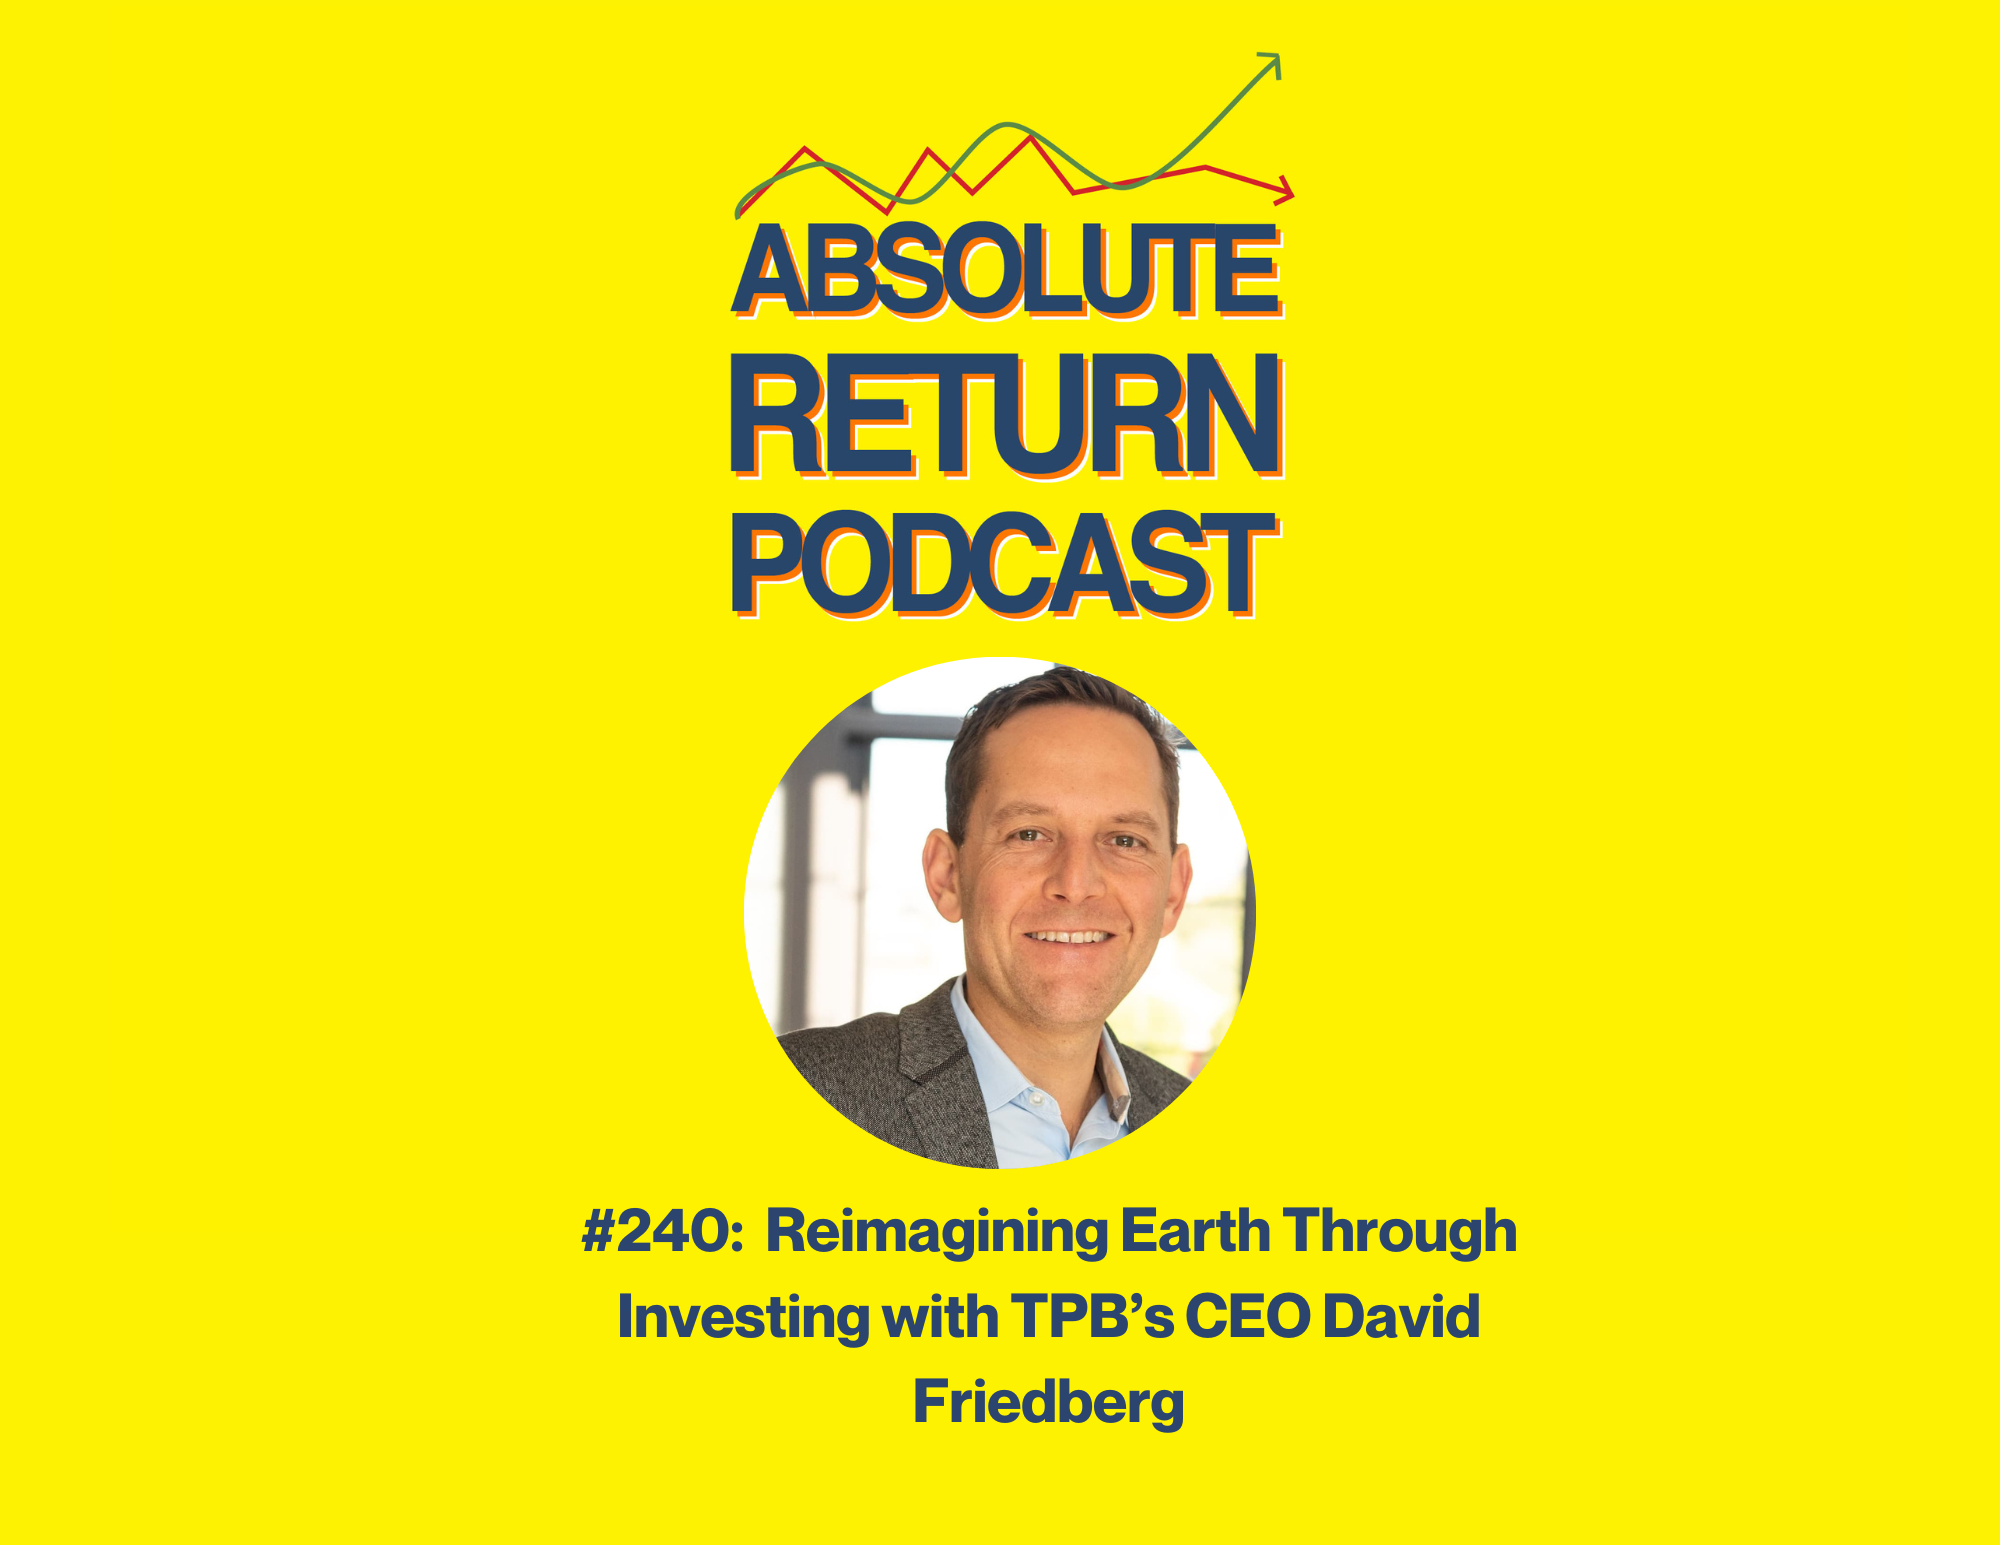 Absolute Return Podcast #240: Reimagining Earth Through Investing with TPB’s CEO David Friedberg